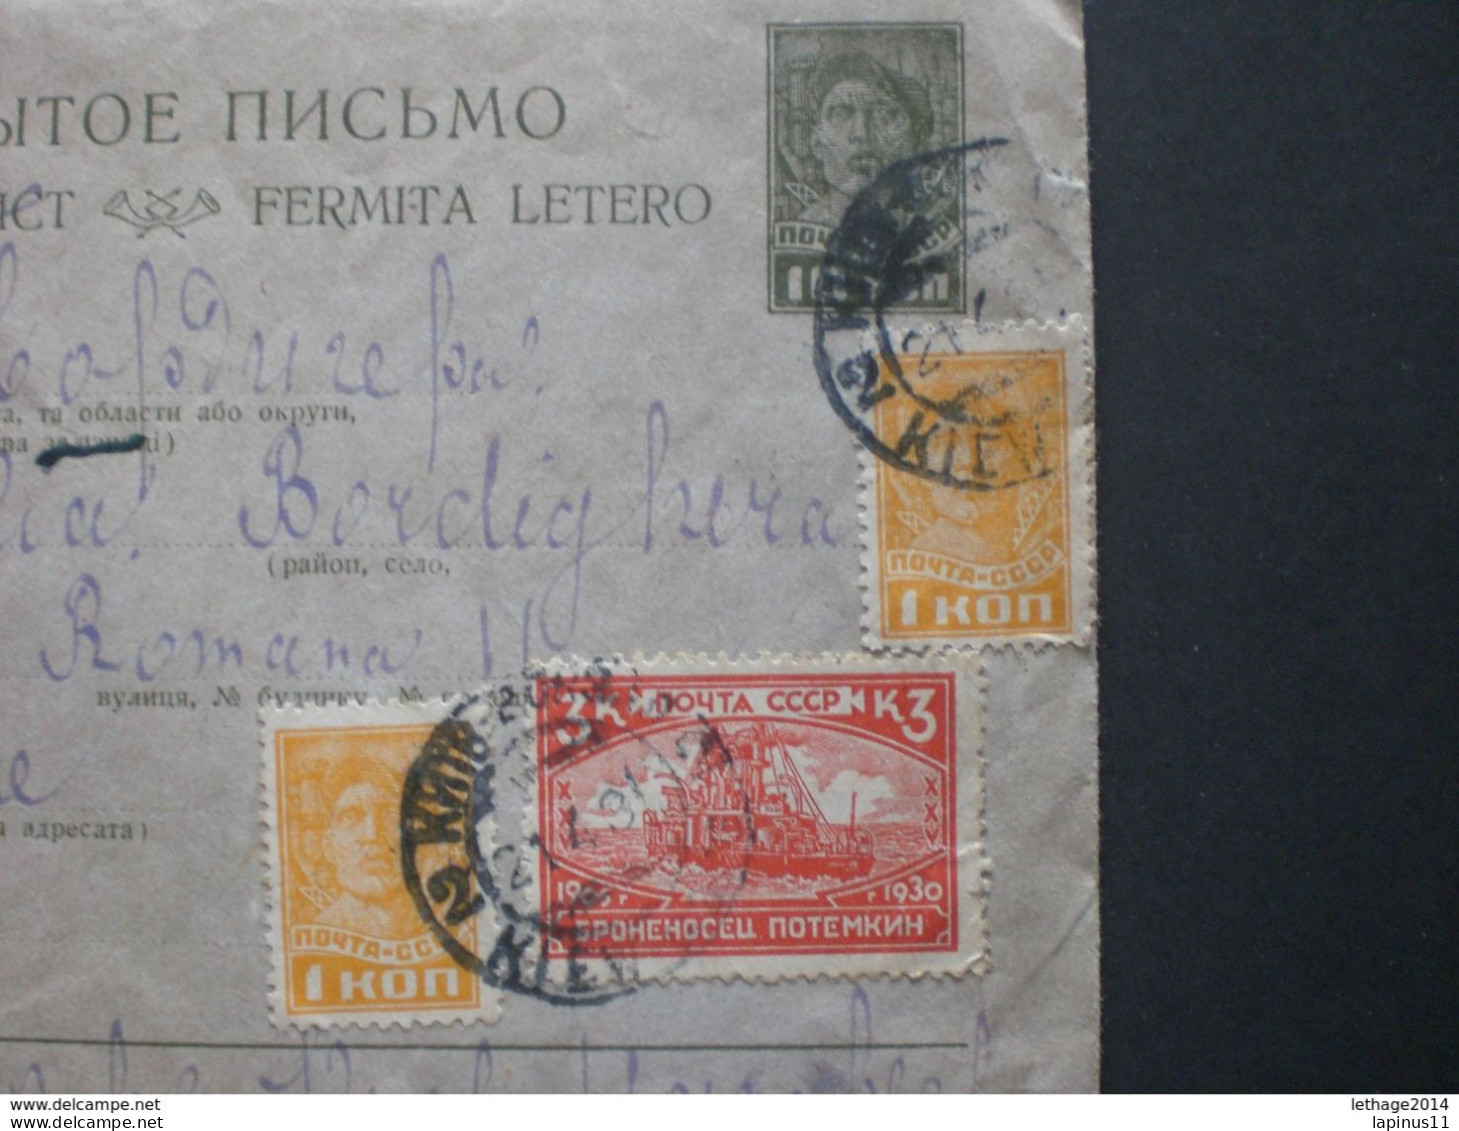 RUSSIA RUSSIE РОССИЯ STAMPS COVER 1931 REGISTER MAIL RUSSLAND TO ITALY RRR RIF. TAGG (144) - Storia Postale